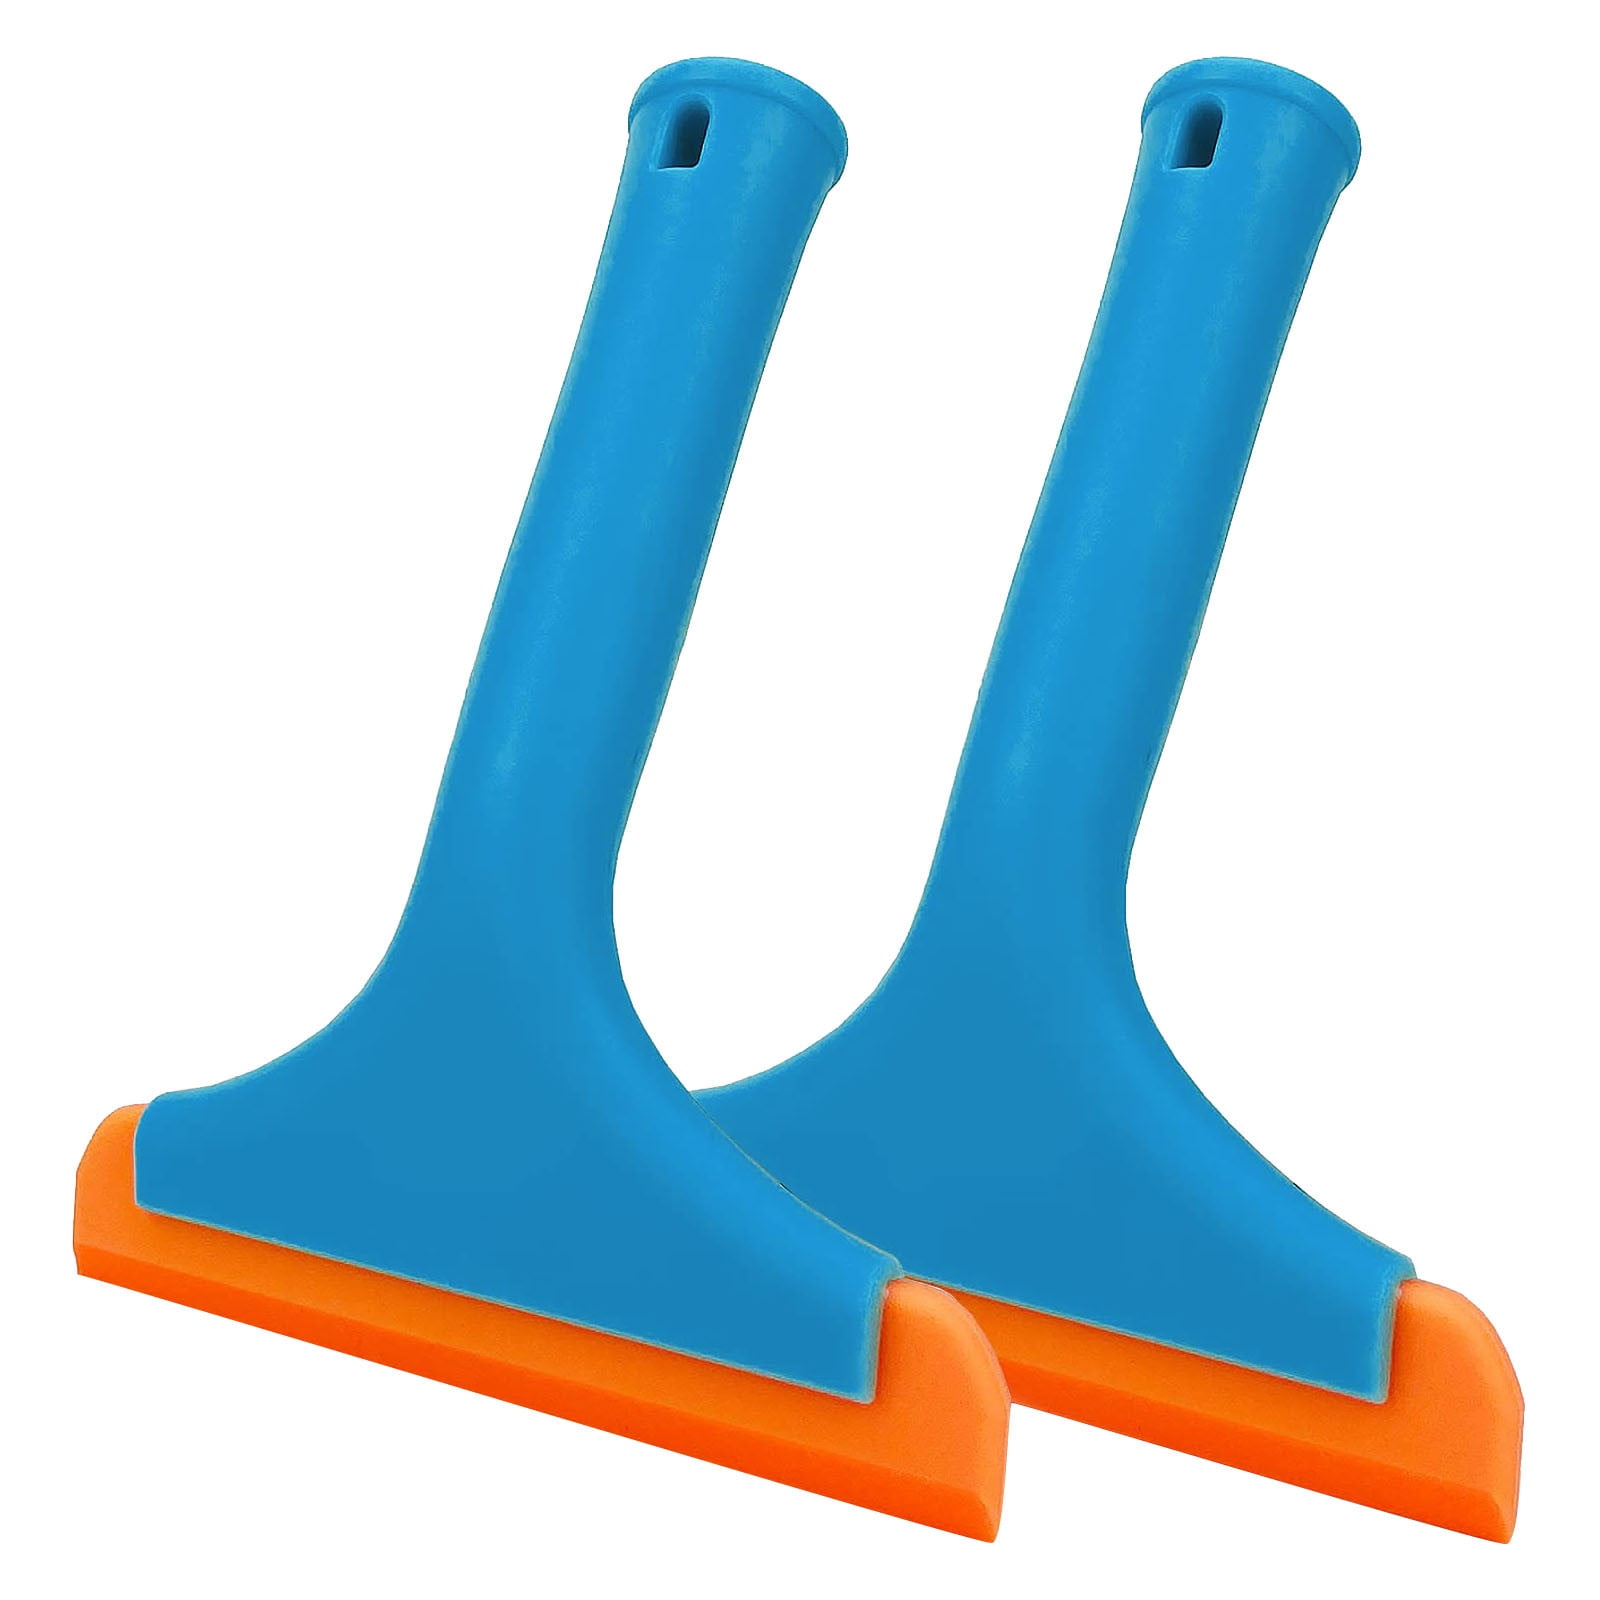 dclobtop RNAB0BG2NKNLR 2 pack silicone small squeegee